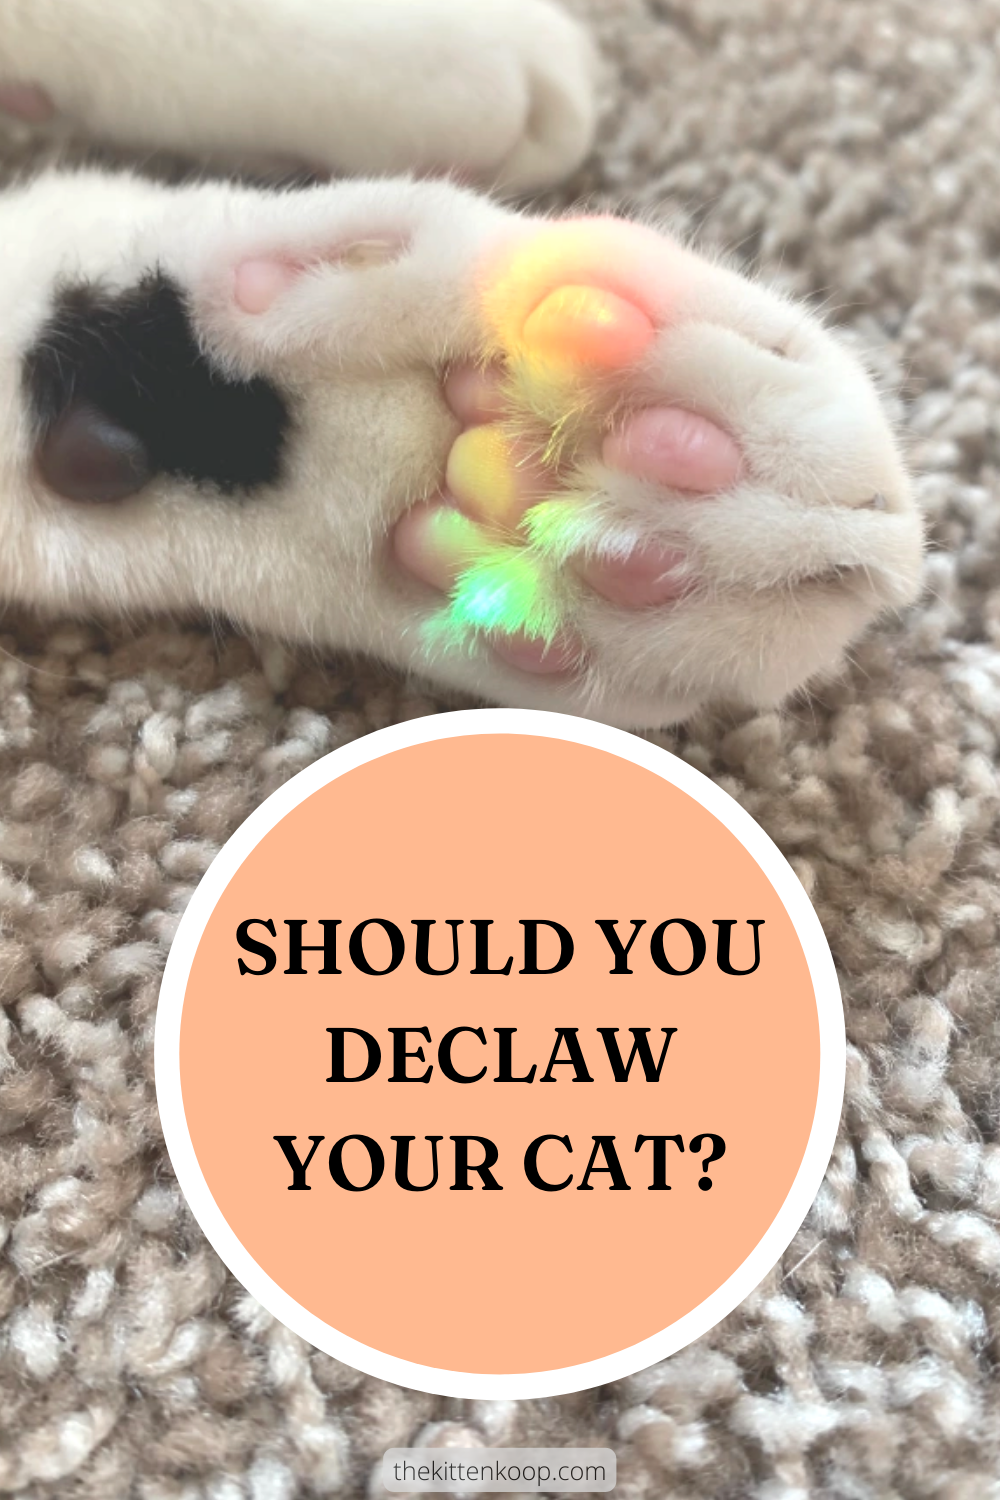 Should You Declaw Your Cat?